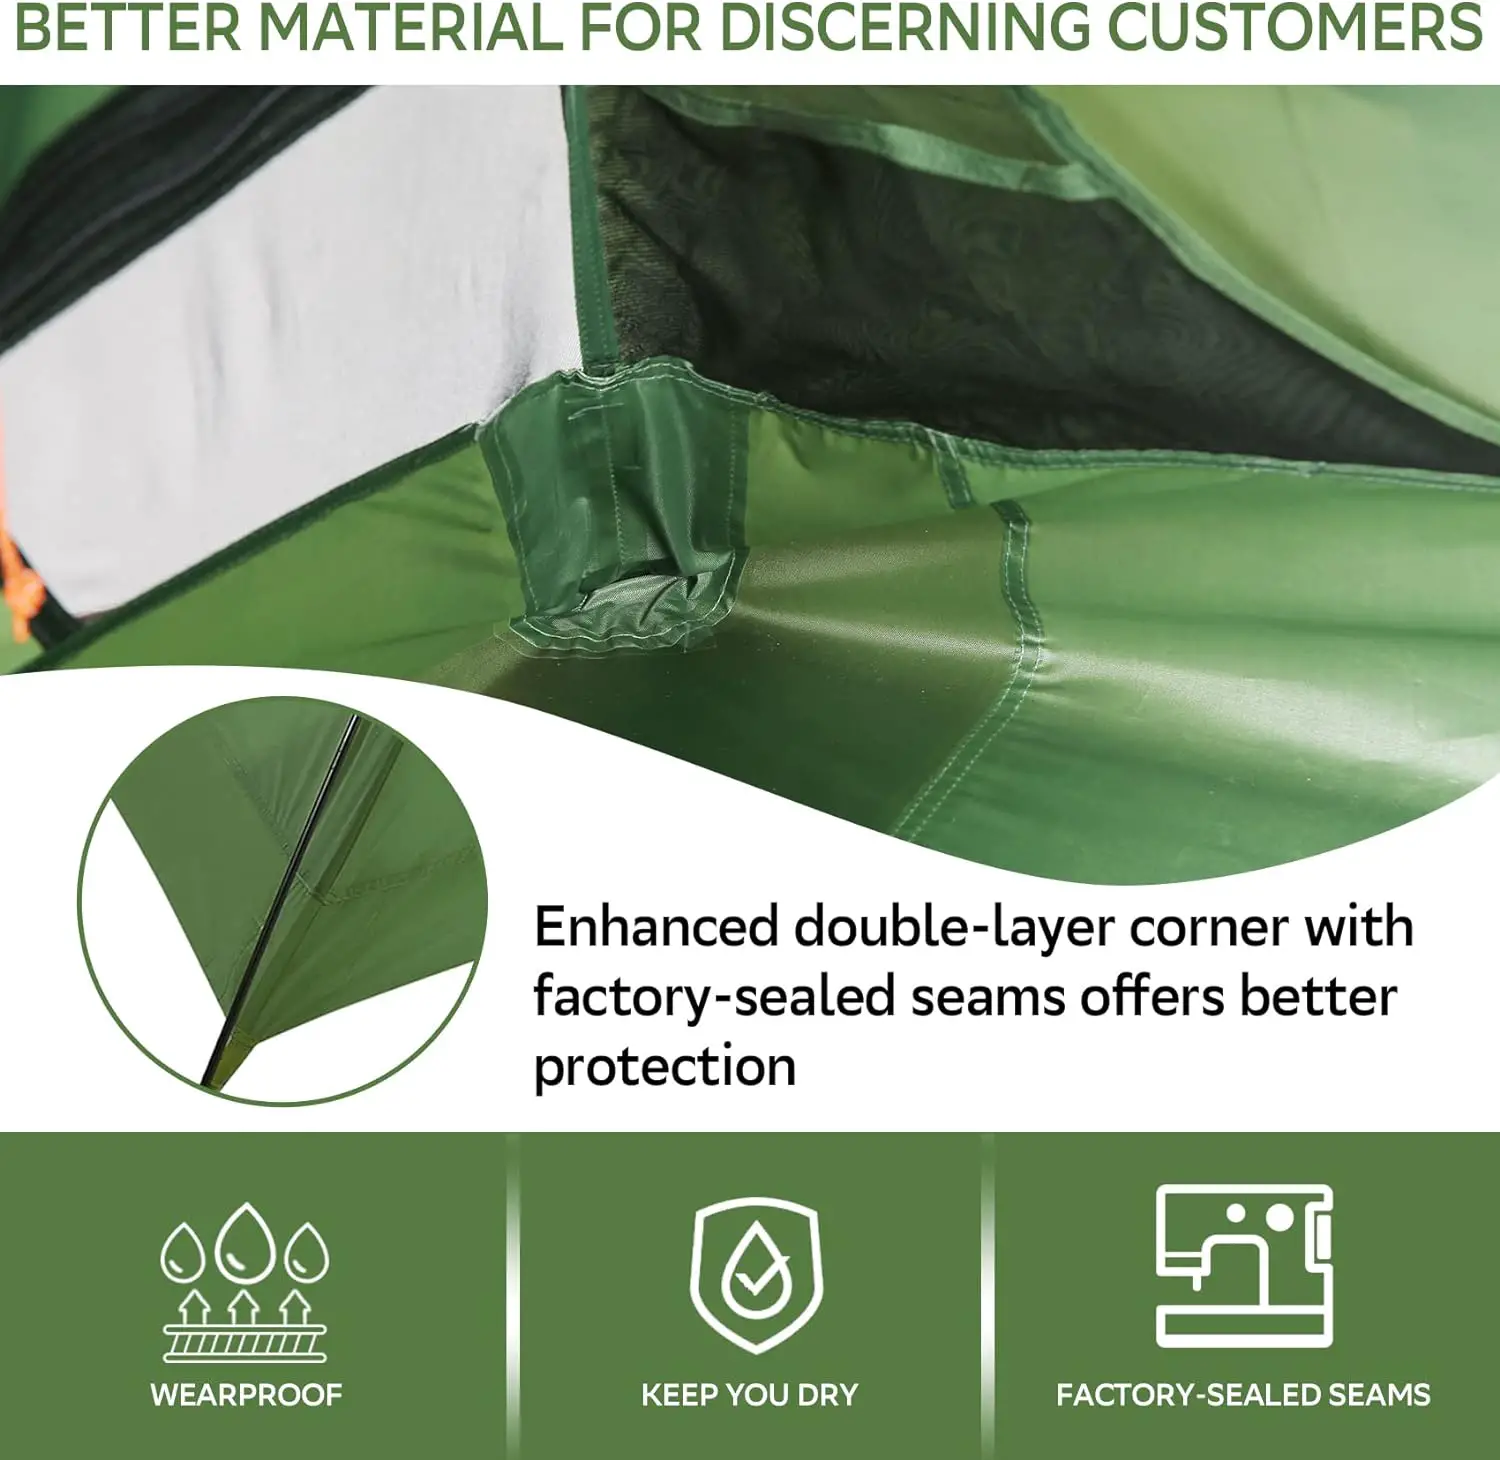 Clostnature Lightweight Backpacking Tent - 3 Season Ultralight Waterproof Camping Tent, Large Size Easy Setup Tent for Family, Outdoor, Hiking and Mountaineering